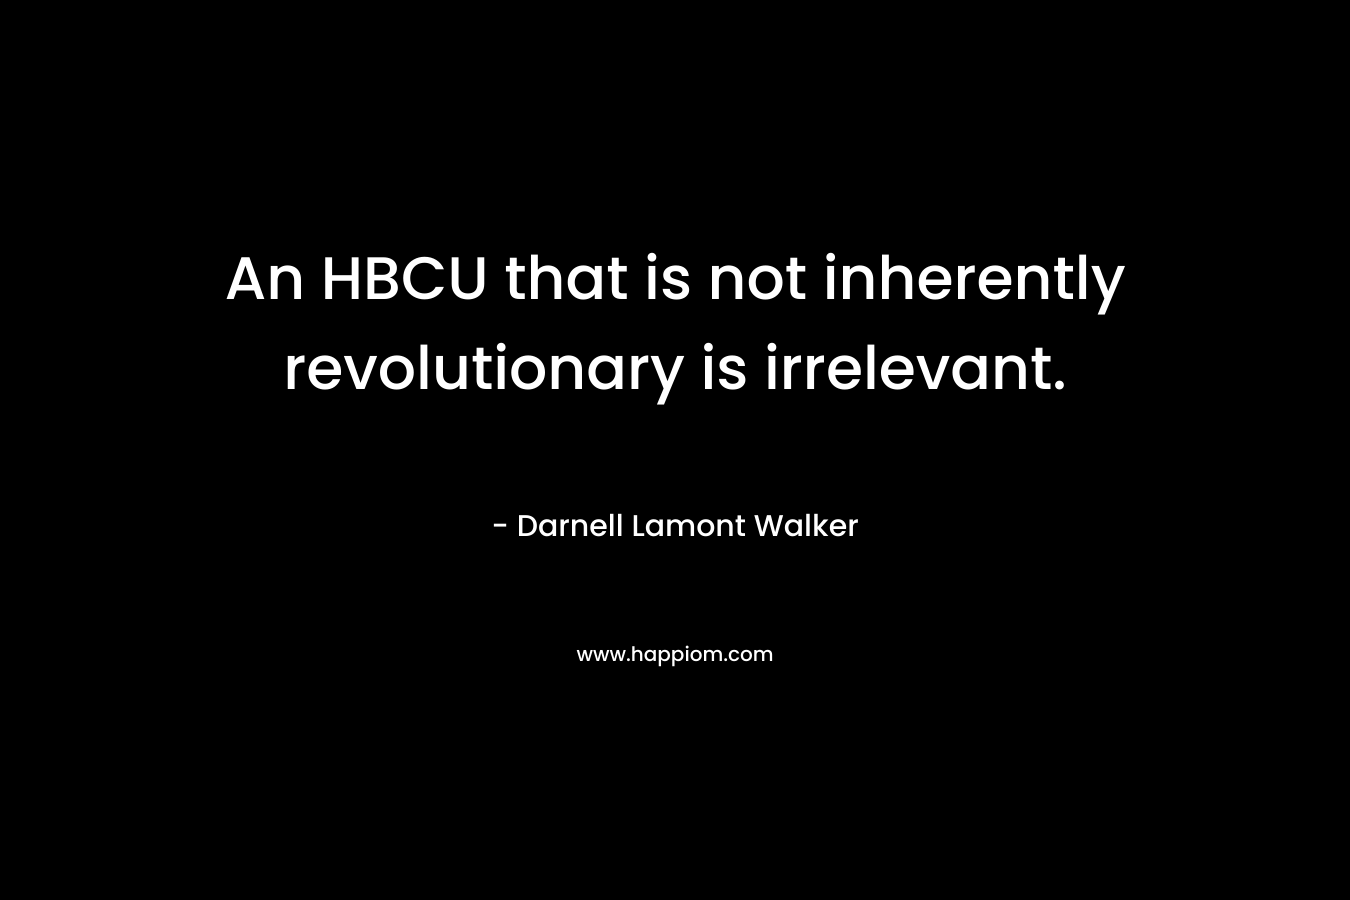 An HBCU that is not inherently revolutionary is irrelevant. – Darnell Lamont Walker